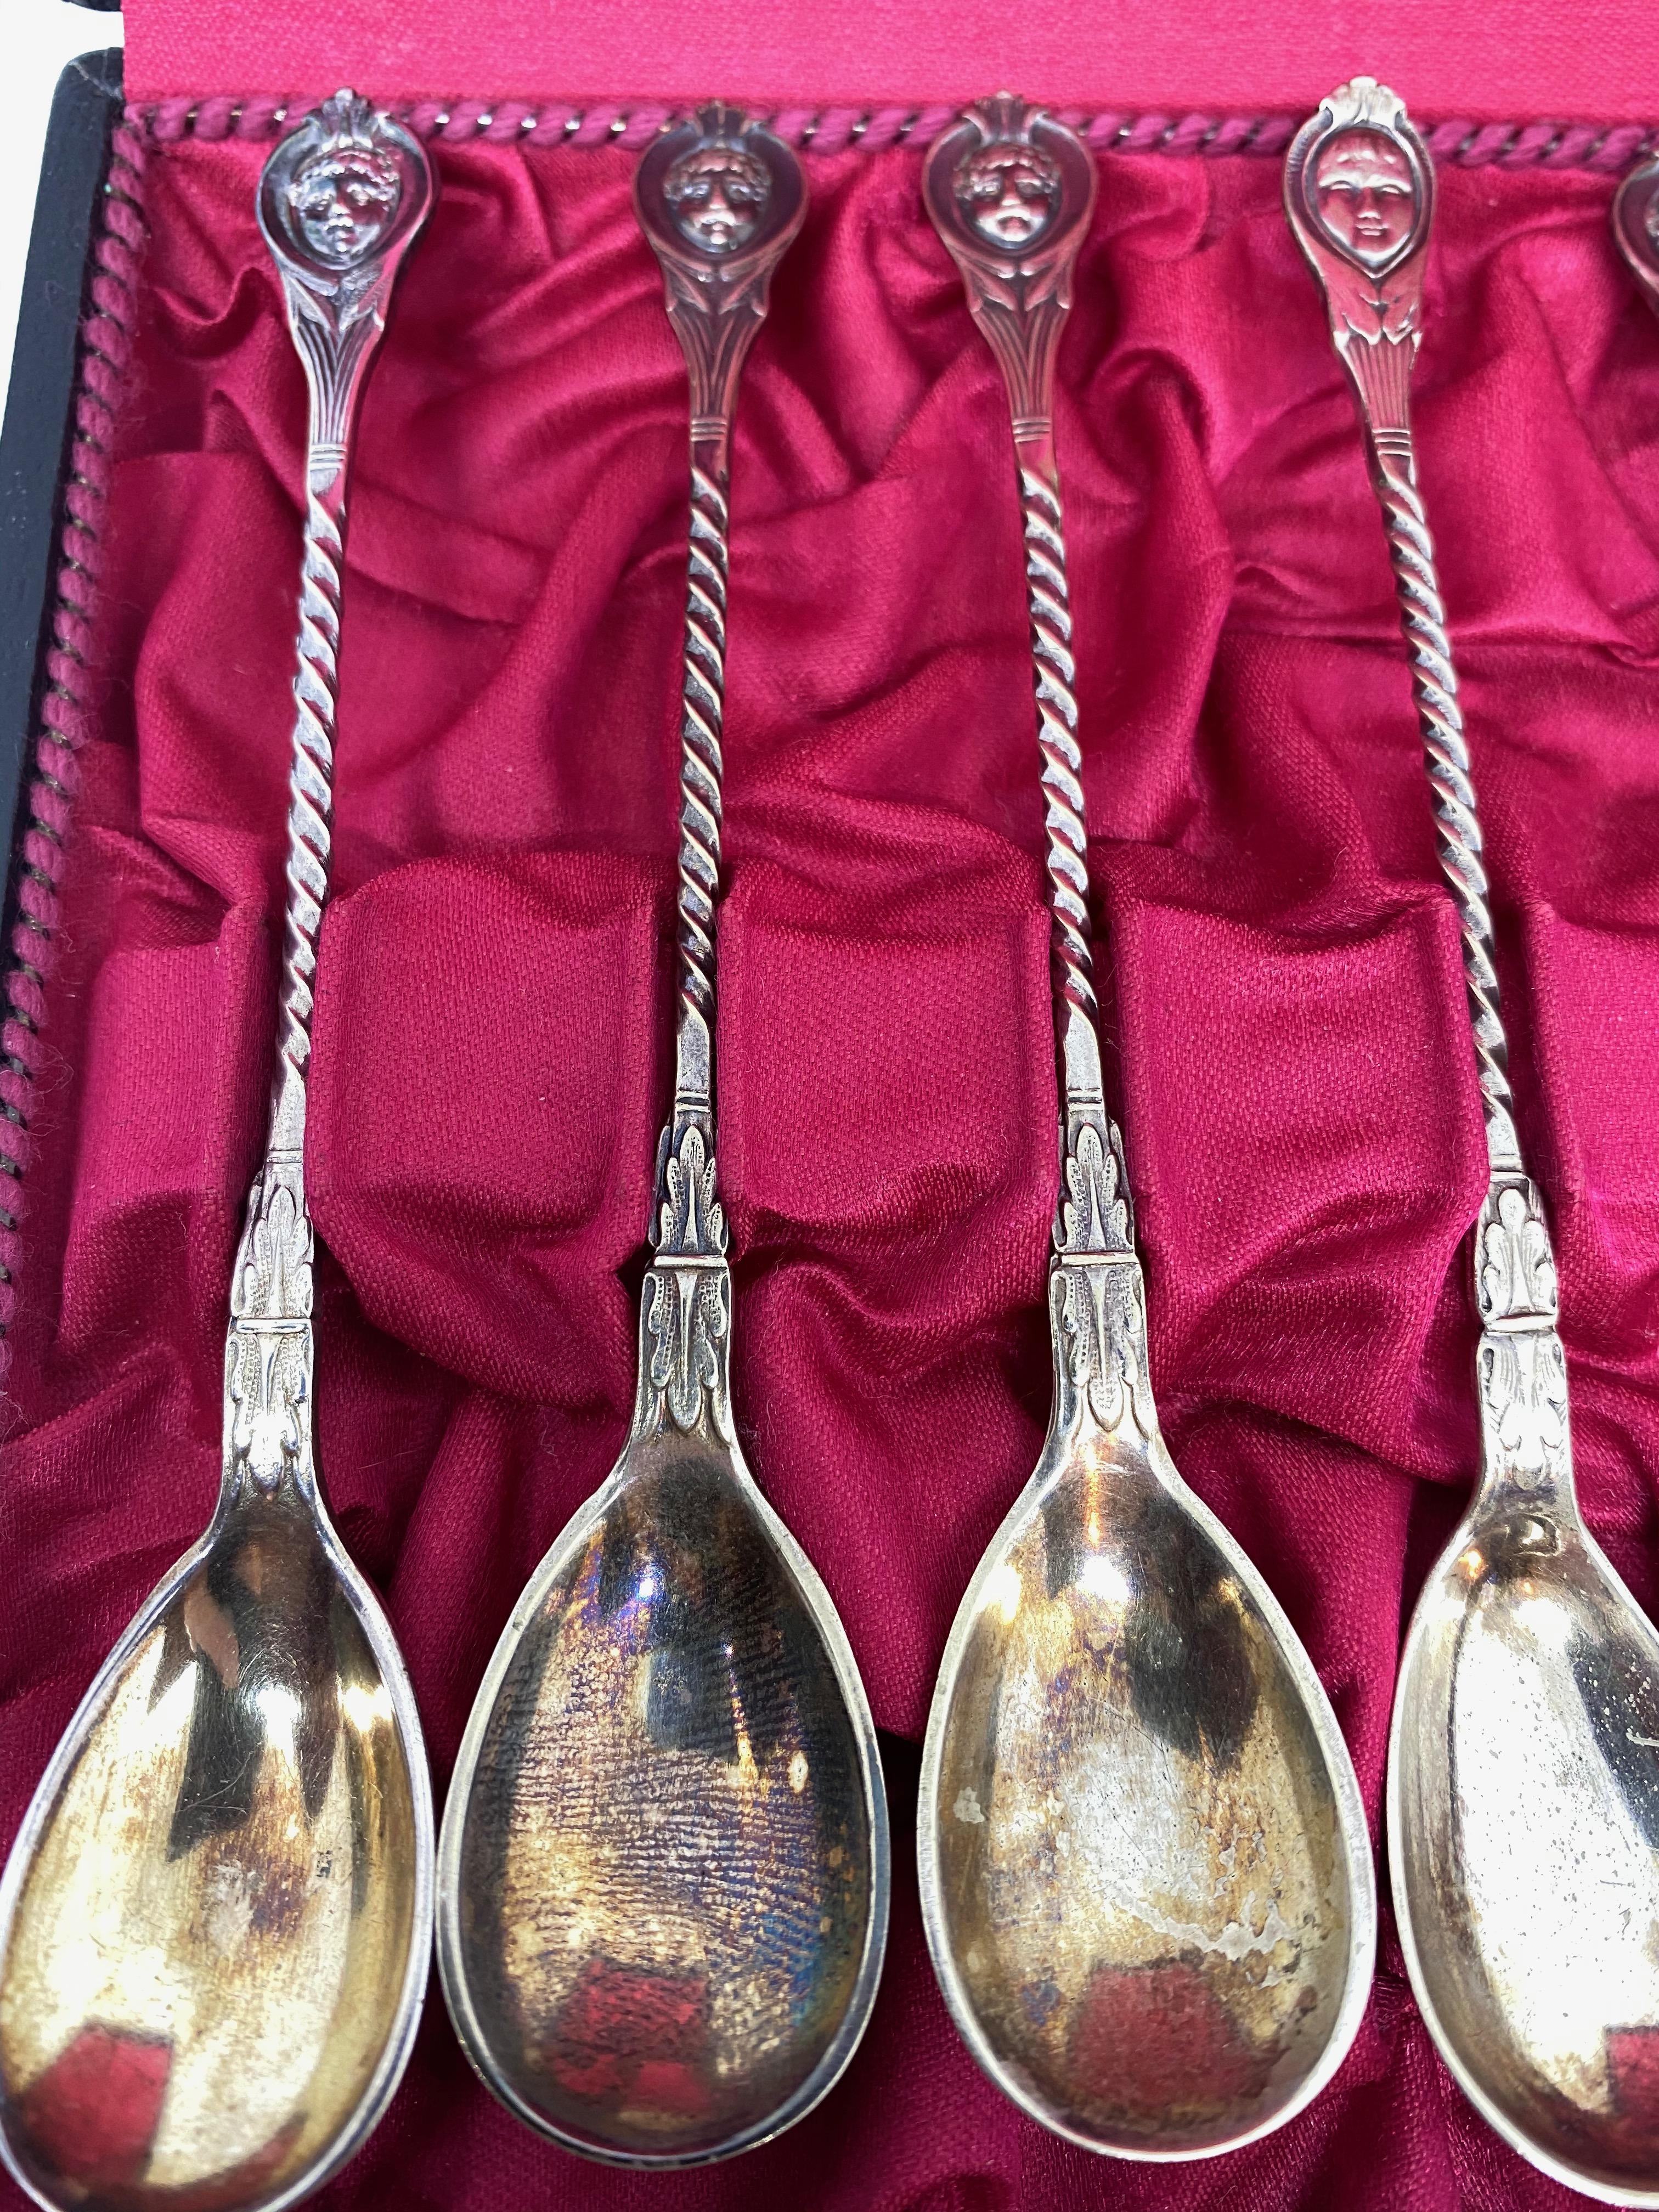 A beautiful Art Nouveau set of six small coffee spoons for espresso size cups. These set is in a original case. Made of silver plated metal, it will make a nice addition to any table. Nice faces on the end of every spoon. Measurements given for each